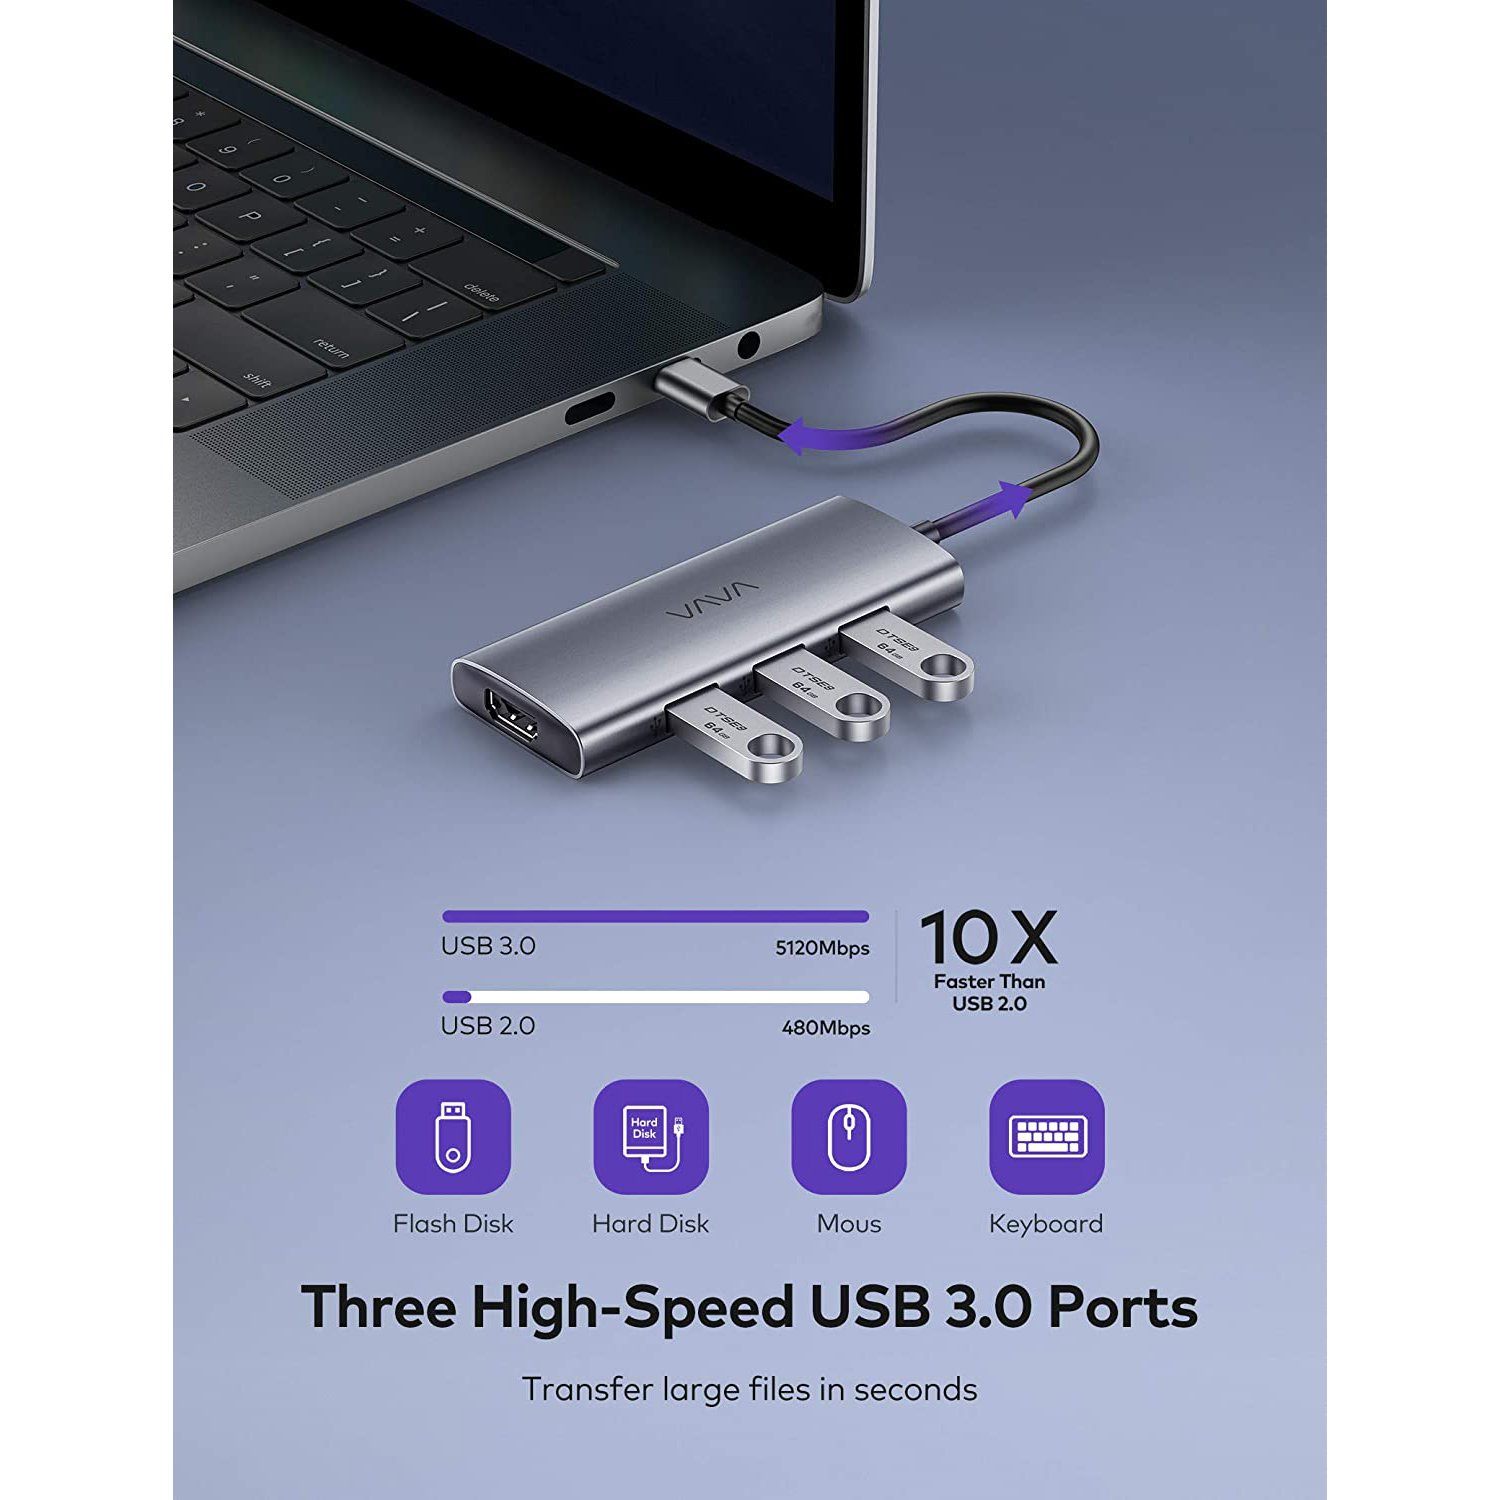 VAVA VA-UC017 7 in 1 USB C Hub with 4K USB-C to HDMI, 3 USB 3.0 Ports, SD/TF Cards Reader, 100W Power Delivery Dock, Gray Default VAVA 